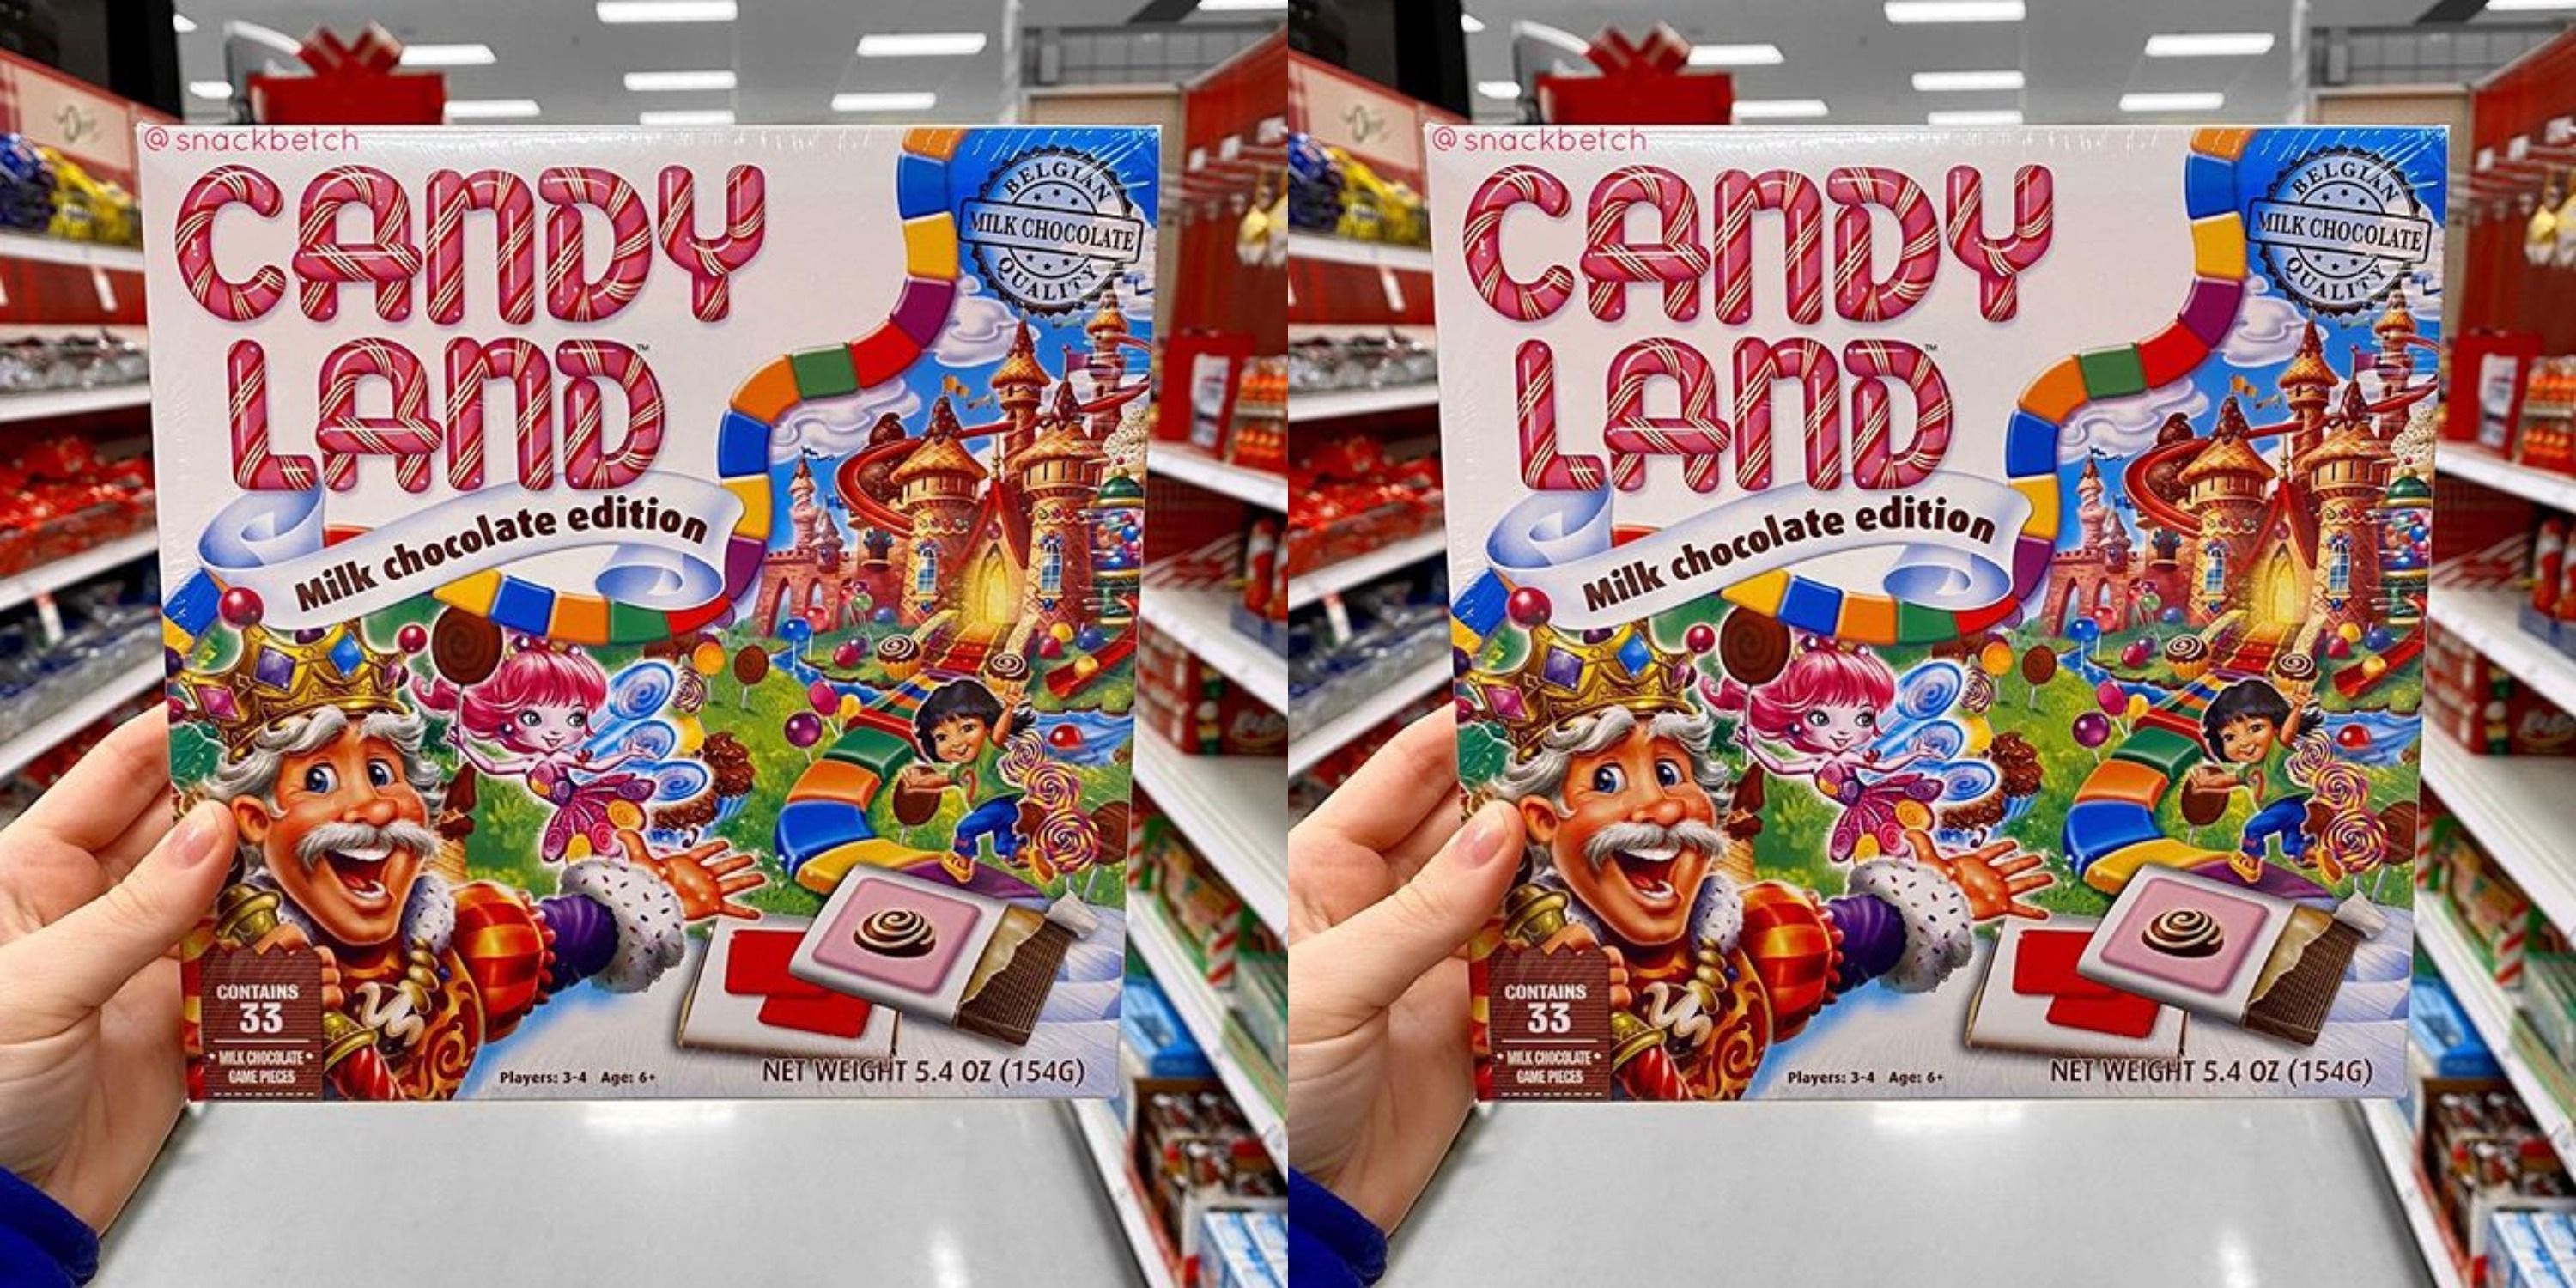 This Candy Land Board Comes With Edible Chocolate Game Pieces